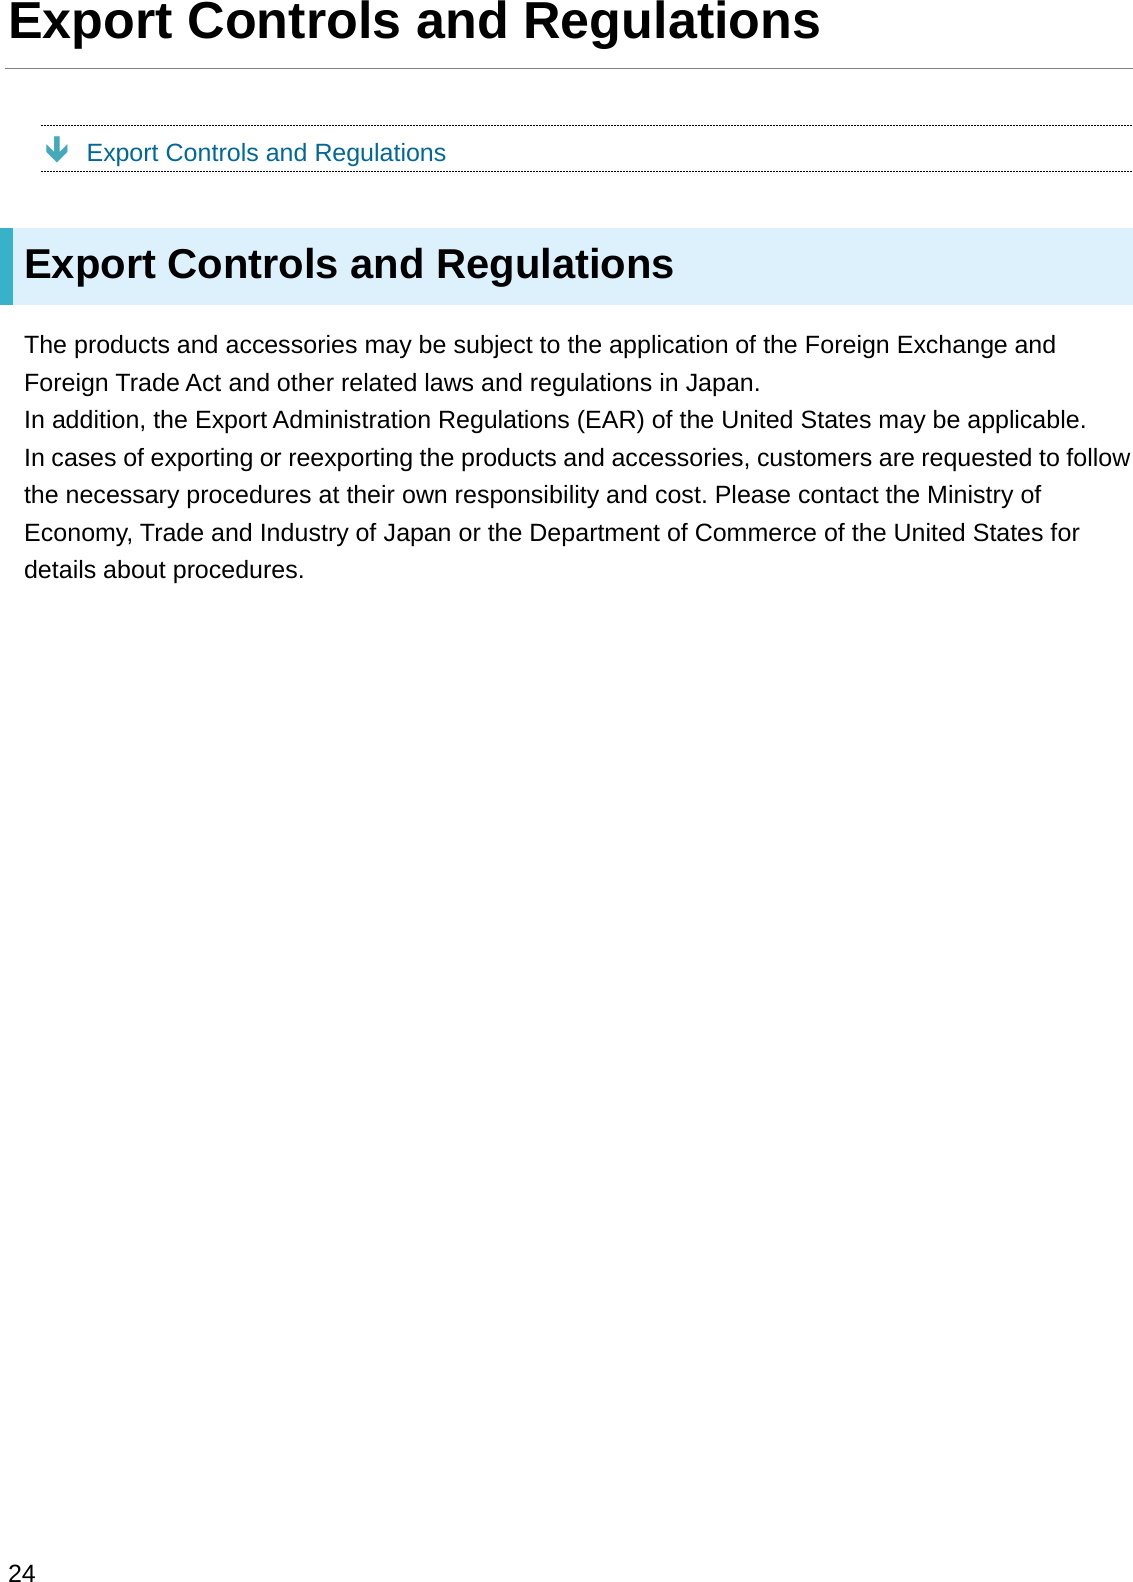 Export Controls and RegulationsÐExport Controls and RegulationsExport Controls and RegulationsThe products and accessories may be subject to the application of the Foreign Exchange and Foreign Trade Act and other related laws and regulations in Japan.In addition, the Export Administration Regulations (EAR) of the United States may be applicable.In cases of exporting or reexporting the products and accessories, customers are requested to follow the necessary procedures at their own responsibility and cost. Please contact the Ministry of Economy, Trade and Industry of Japan or the Department of Commerce of the United States for details about procedures.24